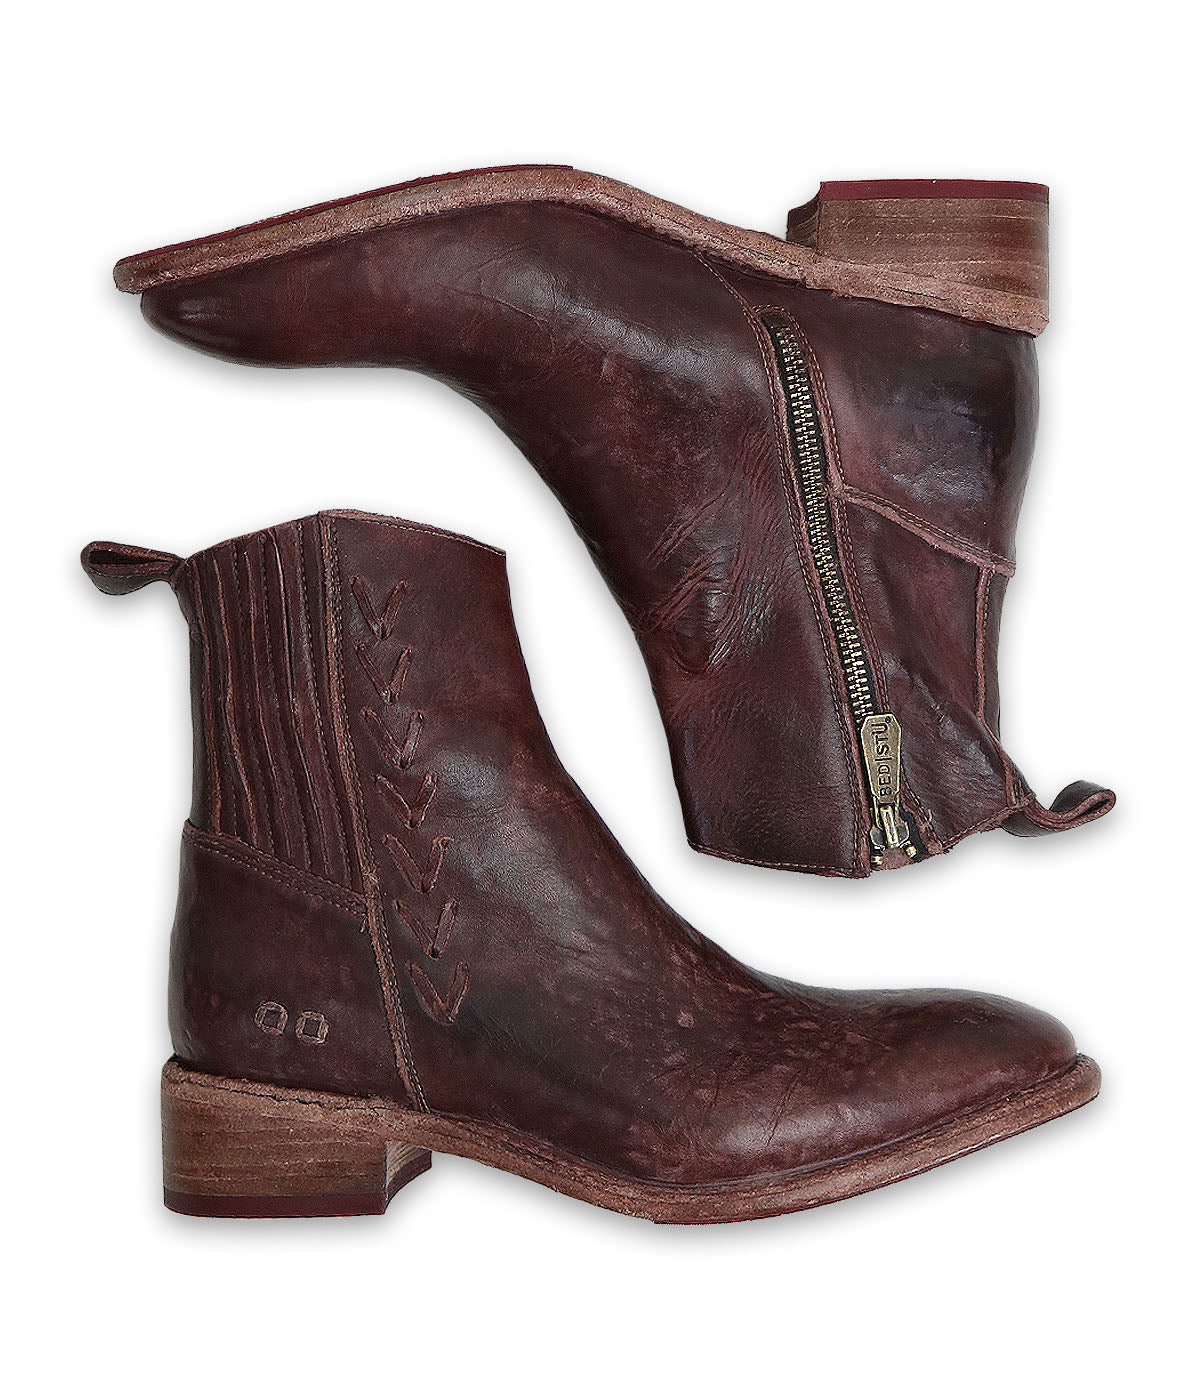 A pair of Alina brown leather ankle boots by Bed Stu.